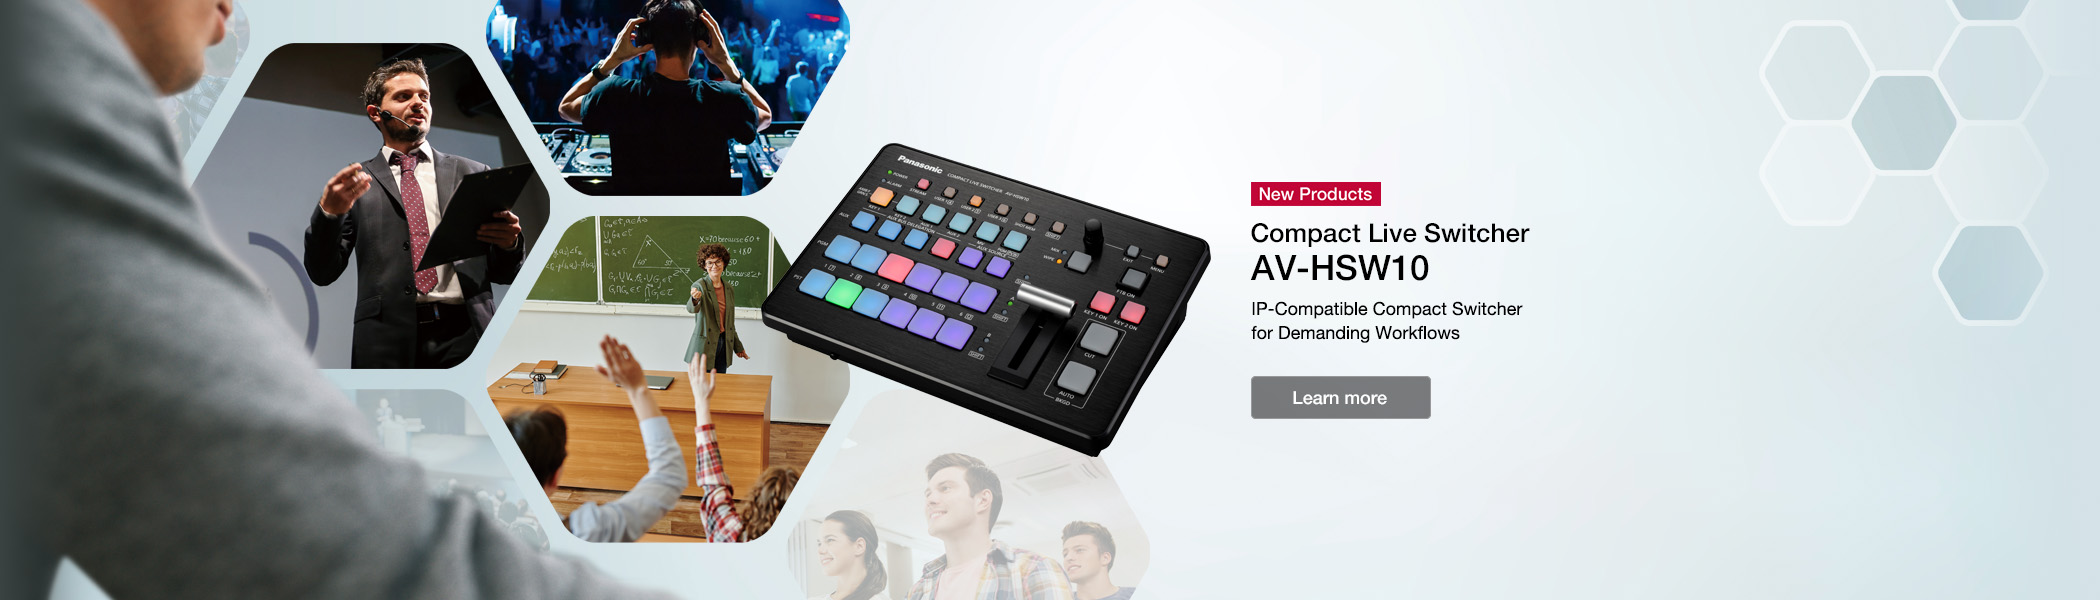 Compact Live Switcher AV-HSW10 IP-Compatible Compact Switcher for Demanding Workflows